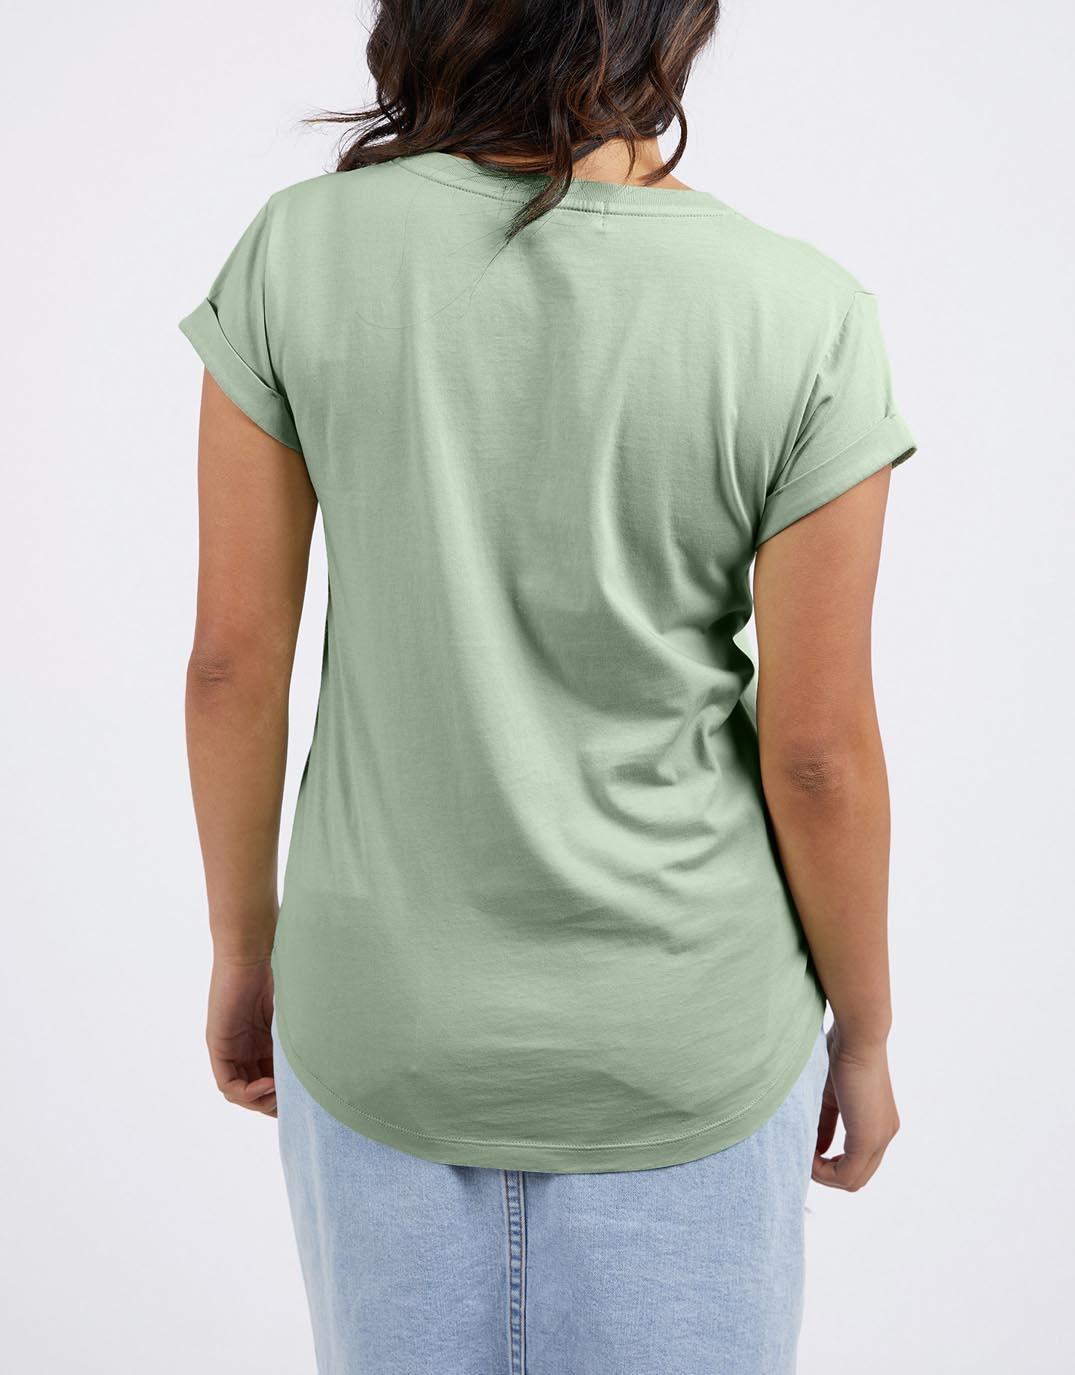 Buy Manly Vee Tee - Mint Foxwood for Sale Online Australia | White & Co.